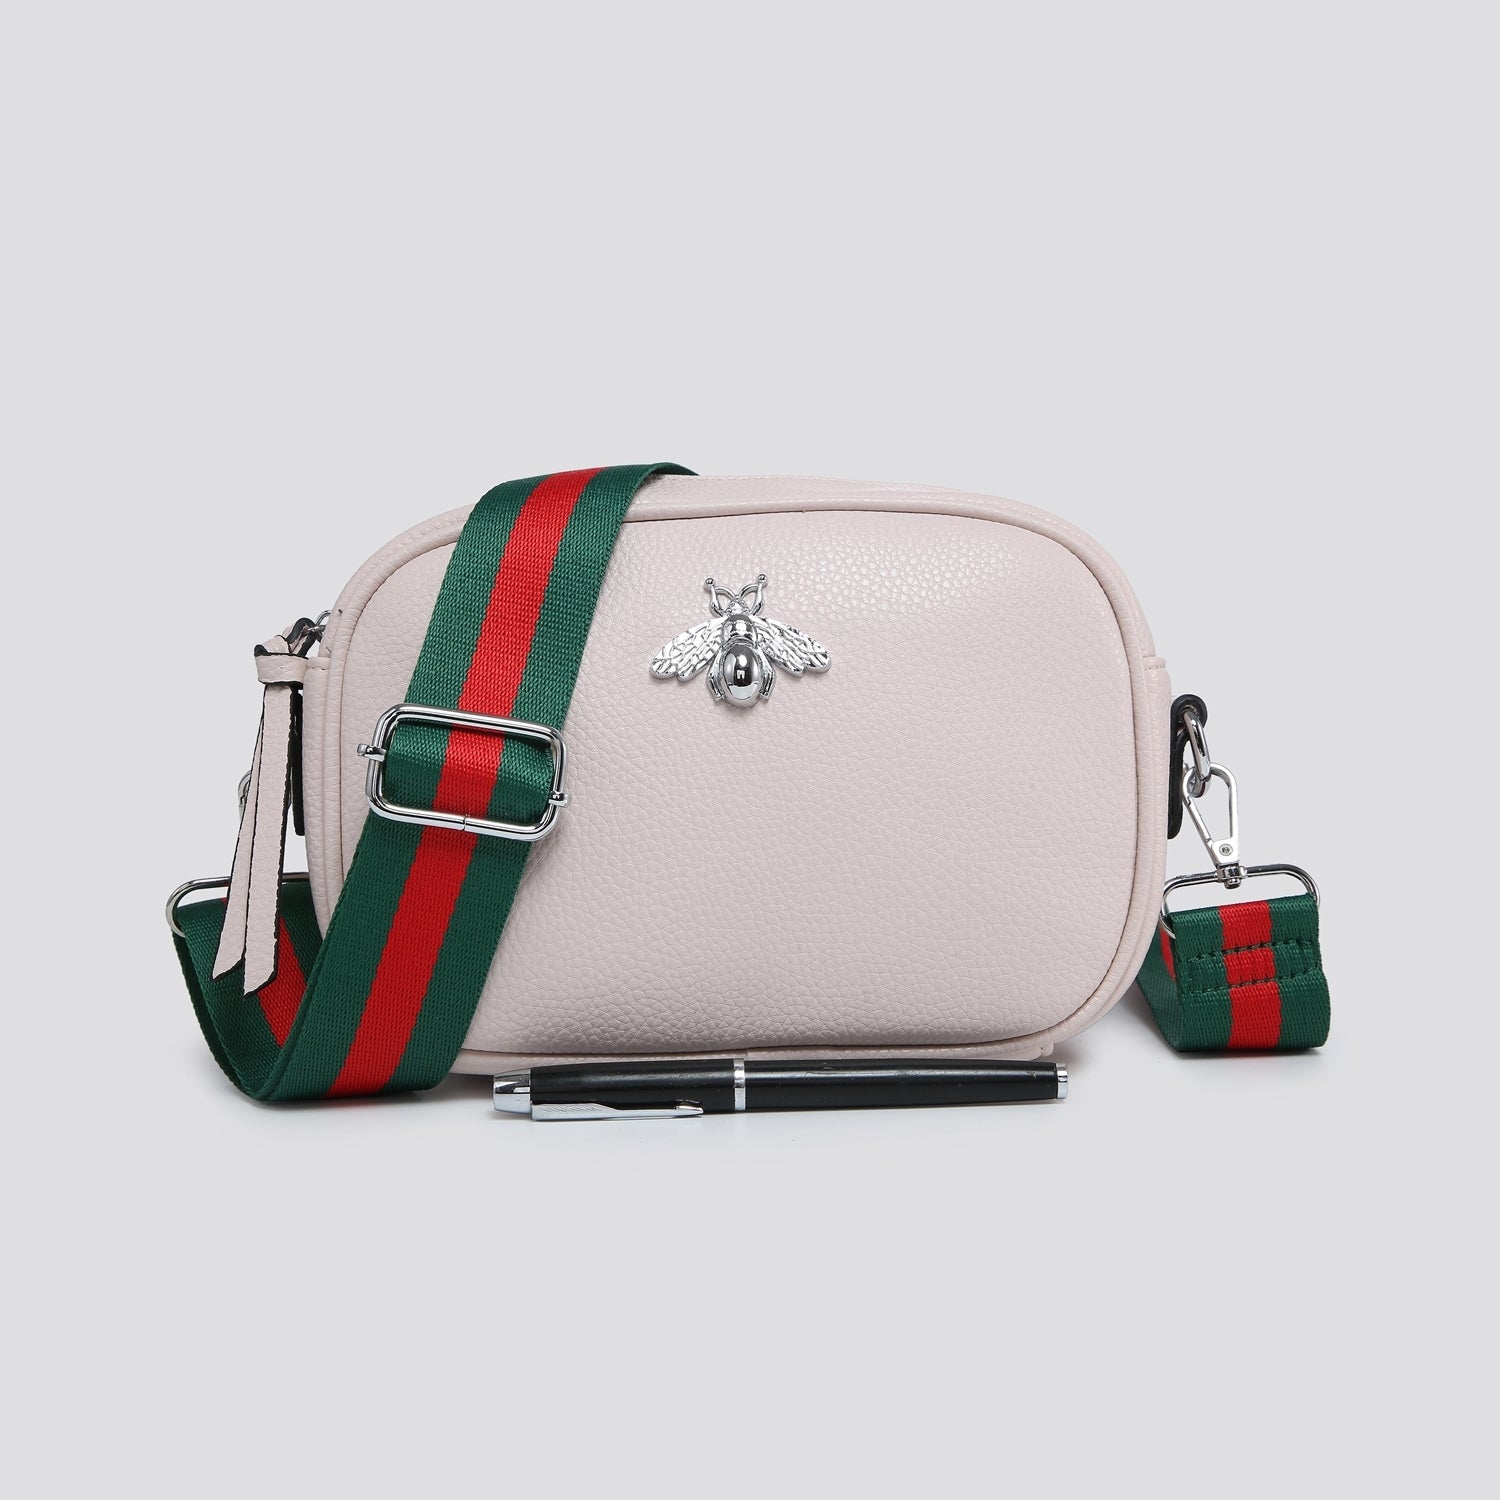 GREEN AND RED STRAP CROSSBODY BAG